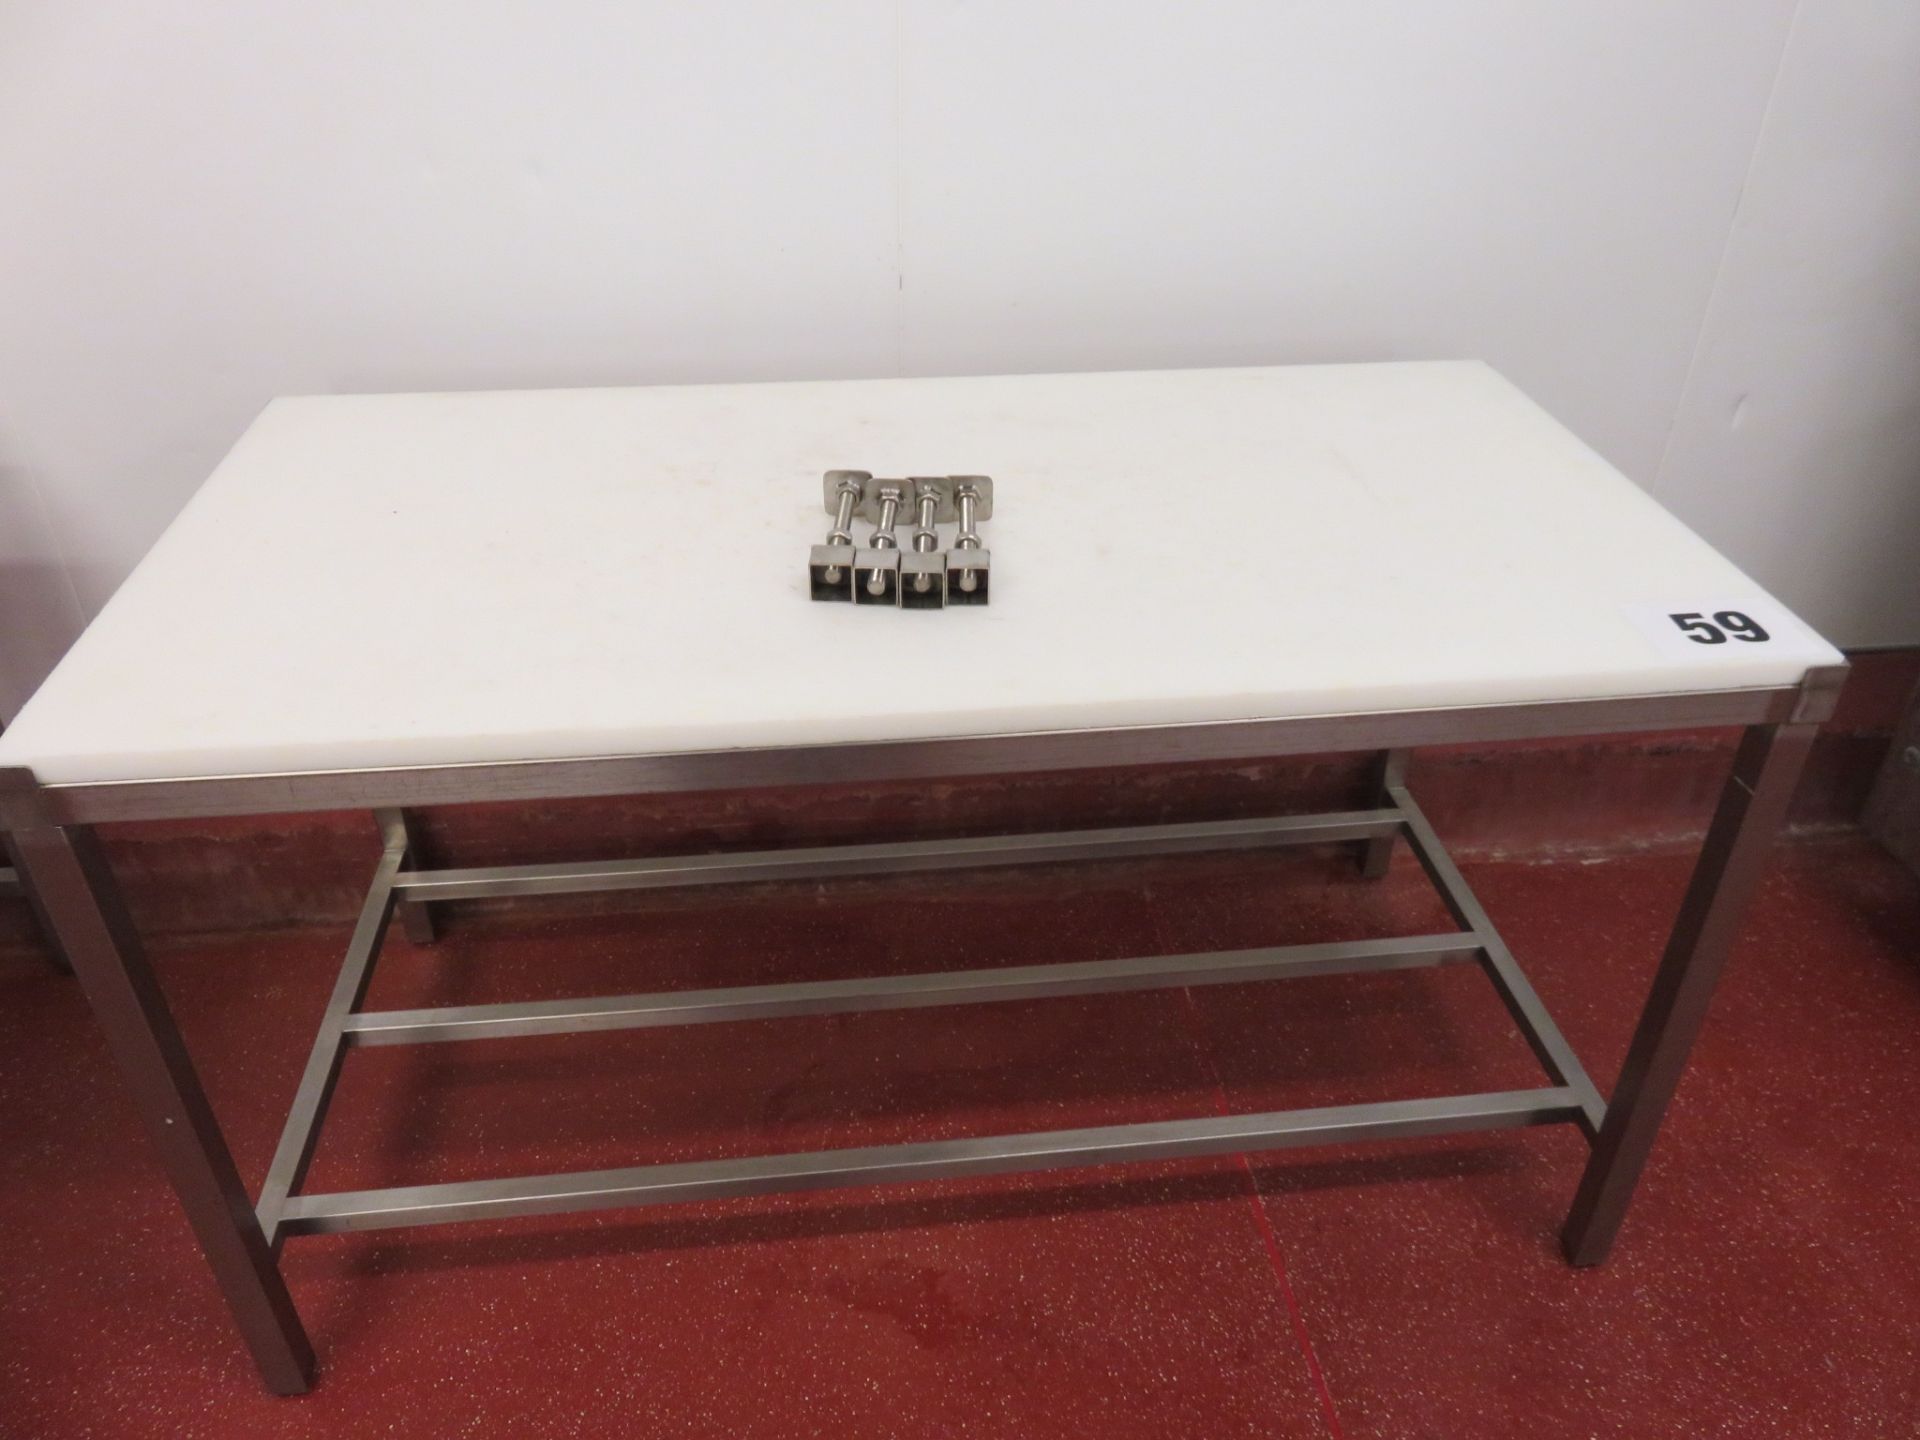 S/s Cutting Table 1.5metres x 750mm and 4 new adjustable legs. Lift Out £15